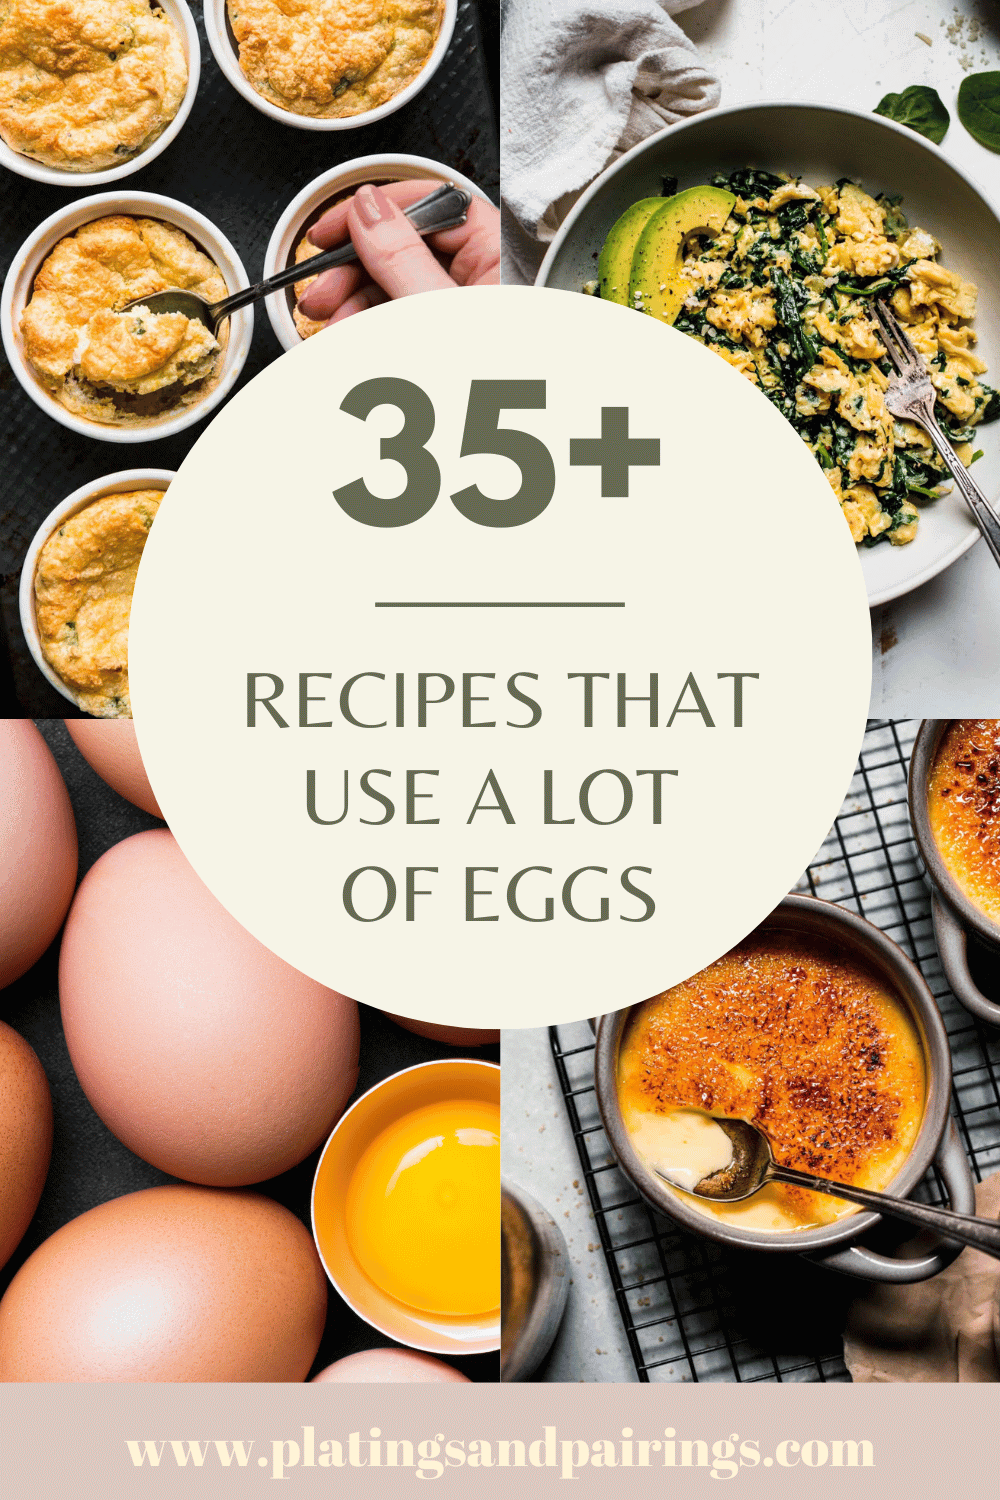 Collage of recipes that use a lot of eggs with text overlay.